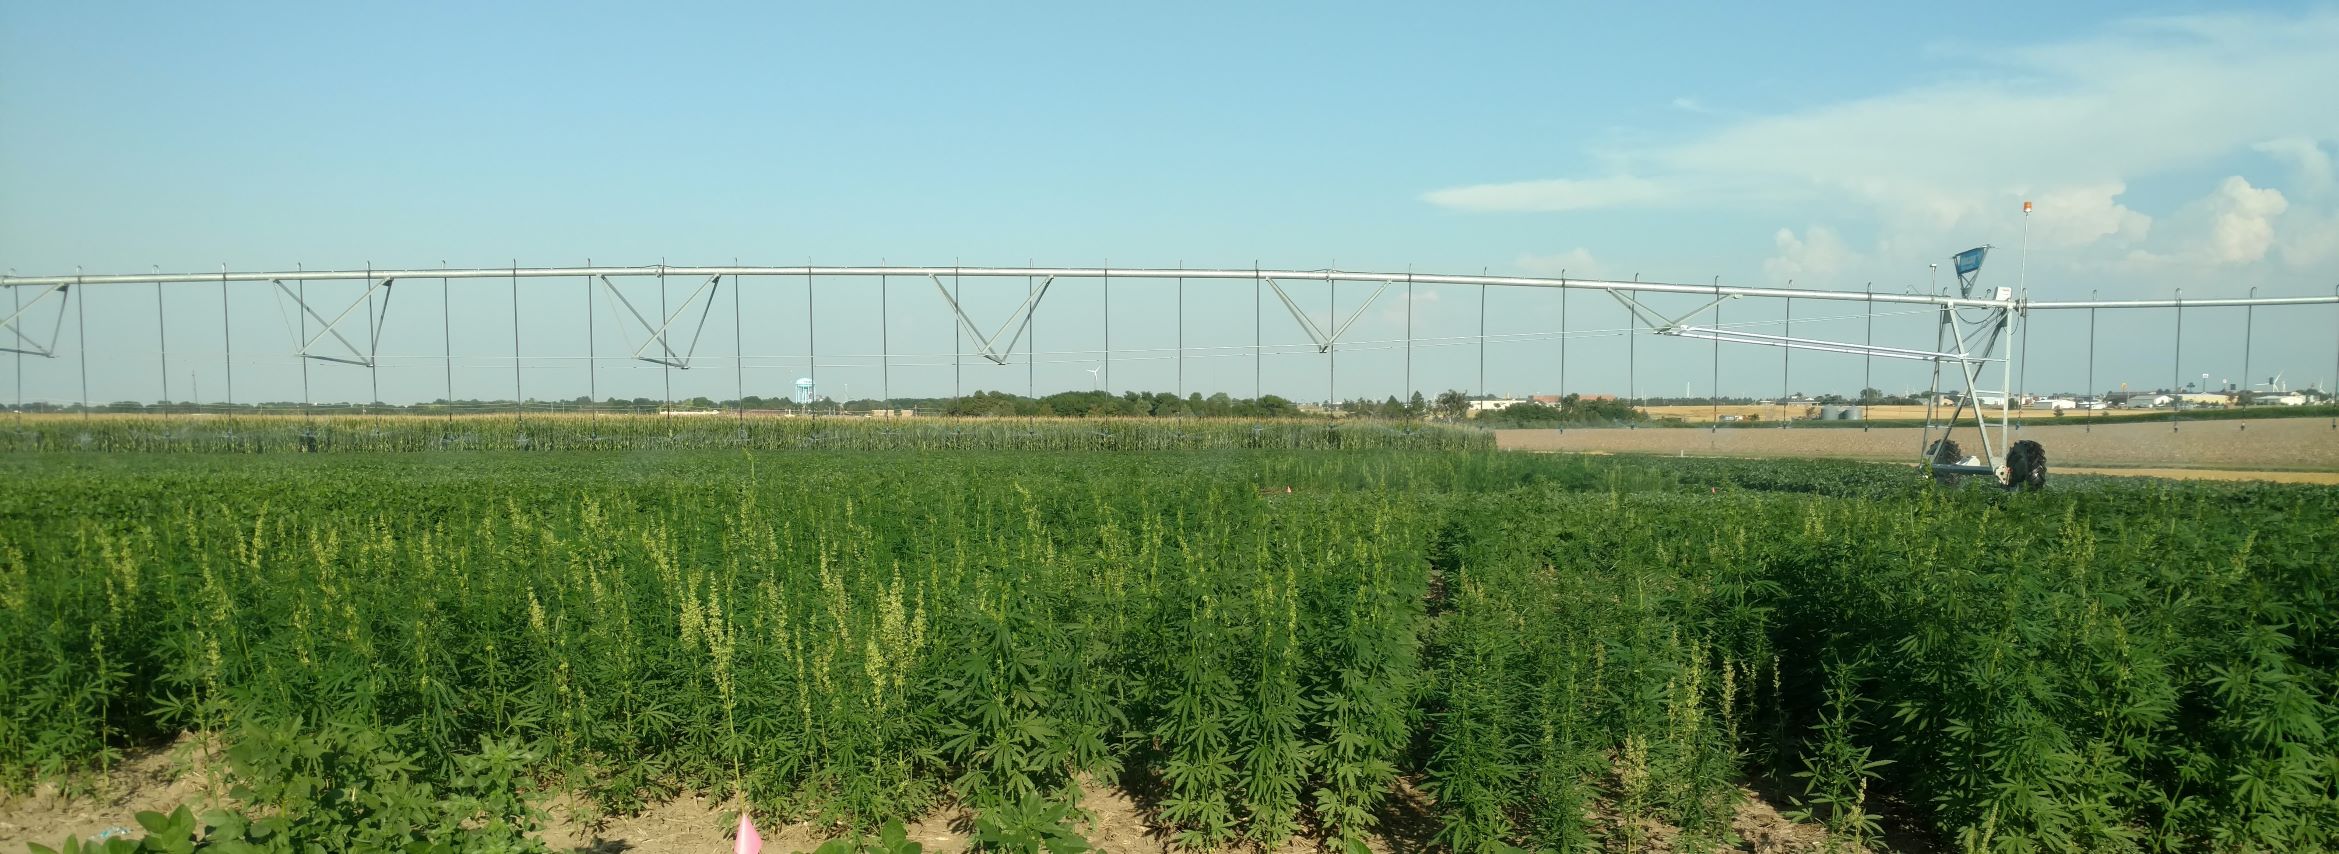 Irrigated Industrial Hemp at Colby